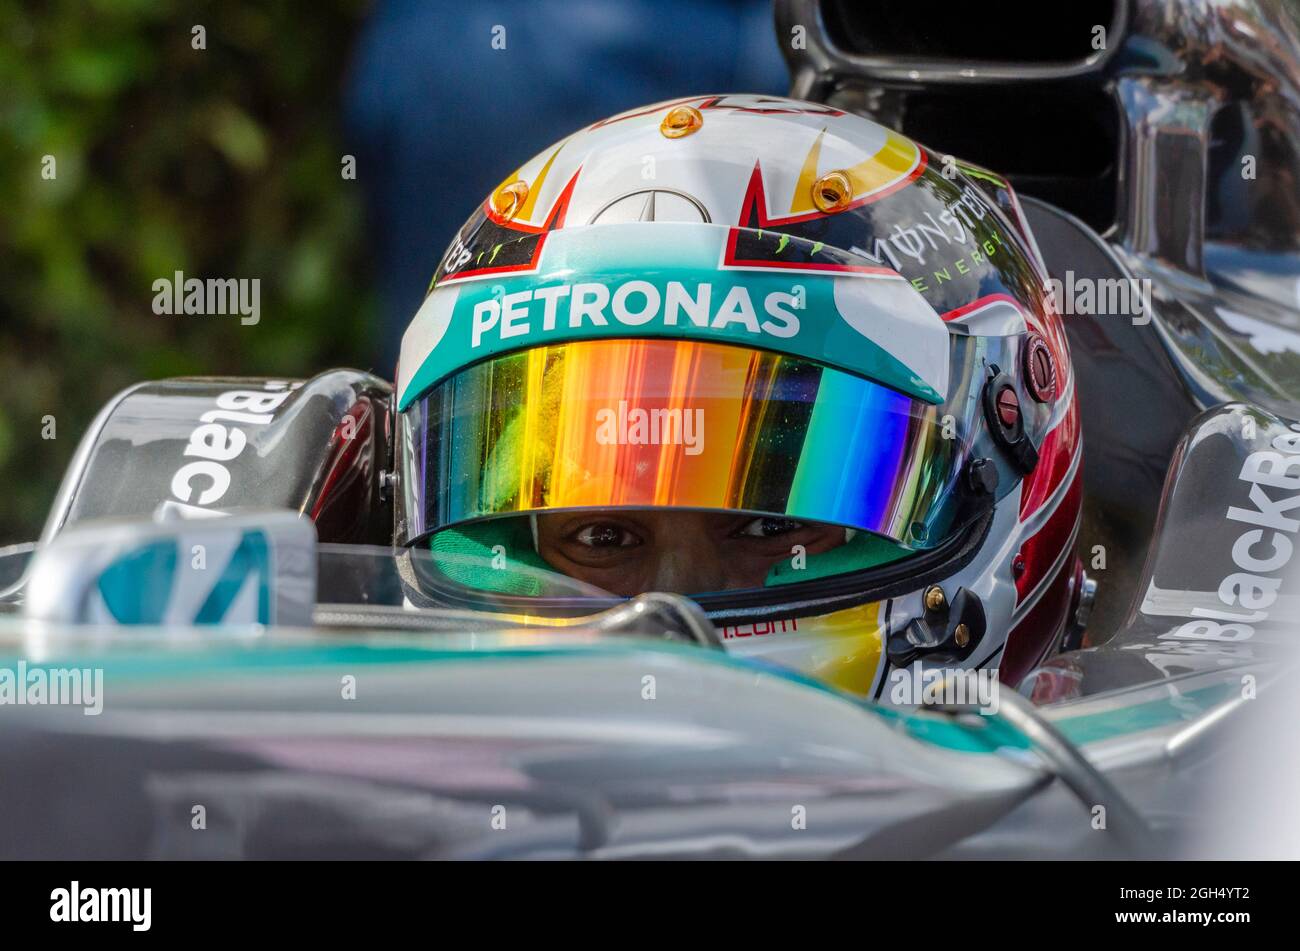 Lewis Hamilton, Mercedes Formula 1 Grand Prix racing driver in the cockpit of Petronas Mercedes F1 car at Goodwood. Eyes peering out from helmet Stock Photo